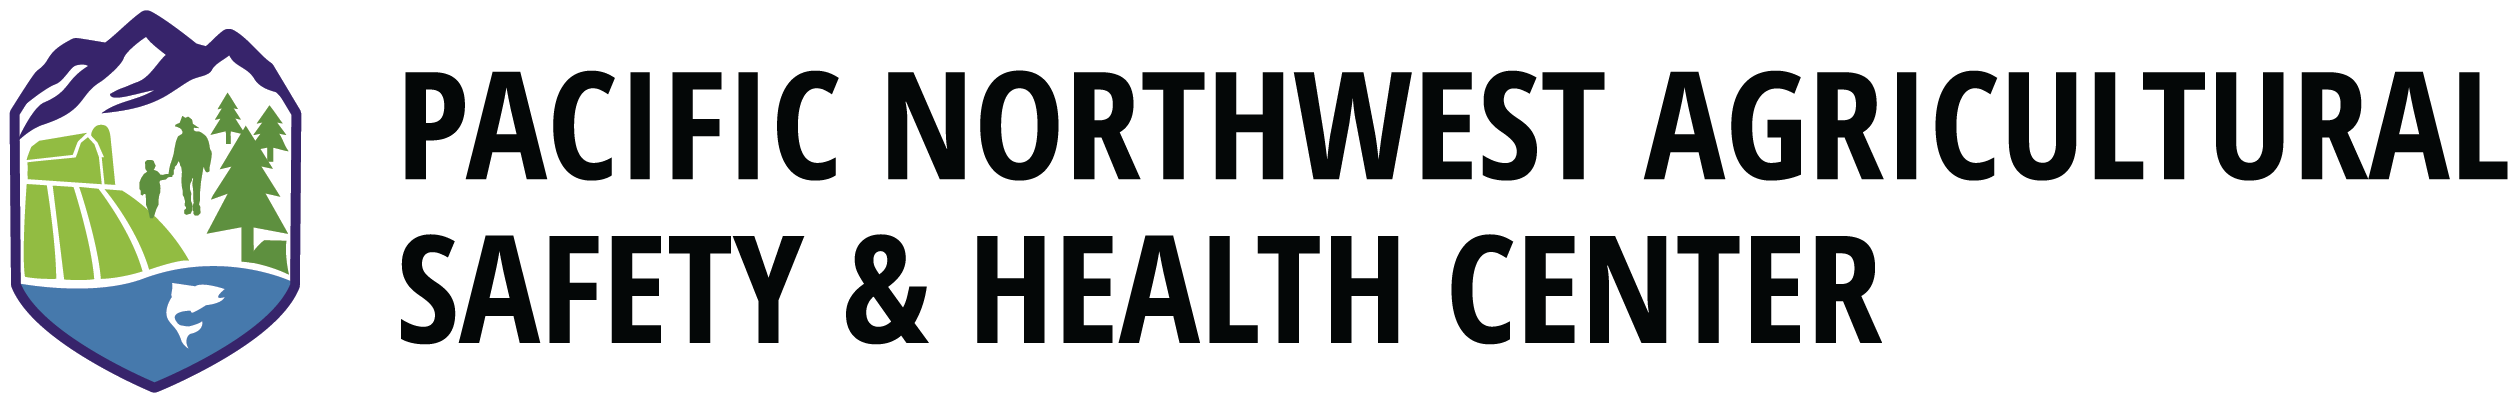 Pacific Northwest Agriculture Safety and Health Center logo